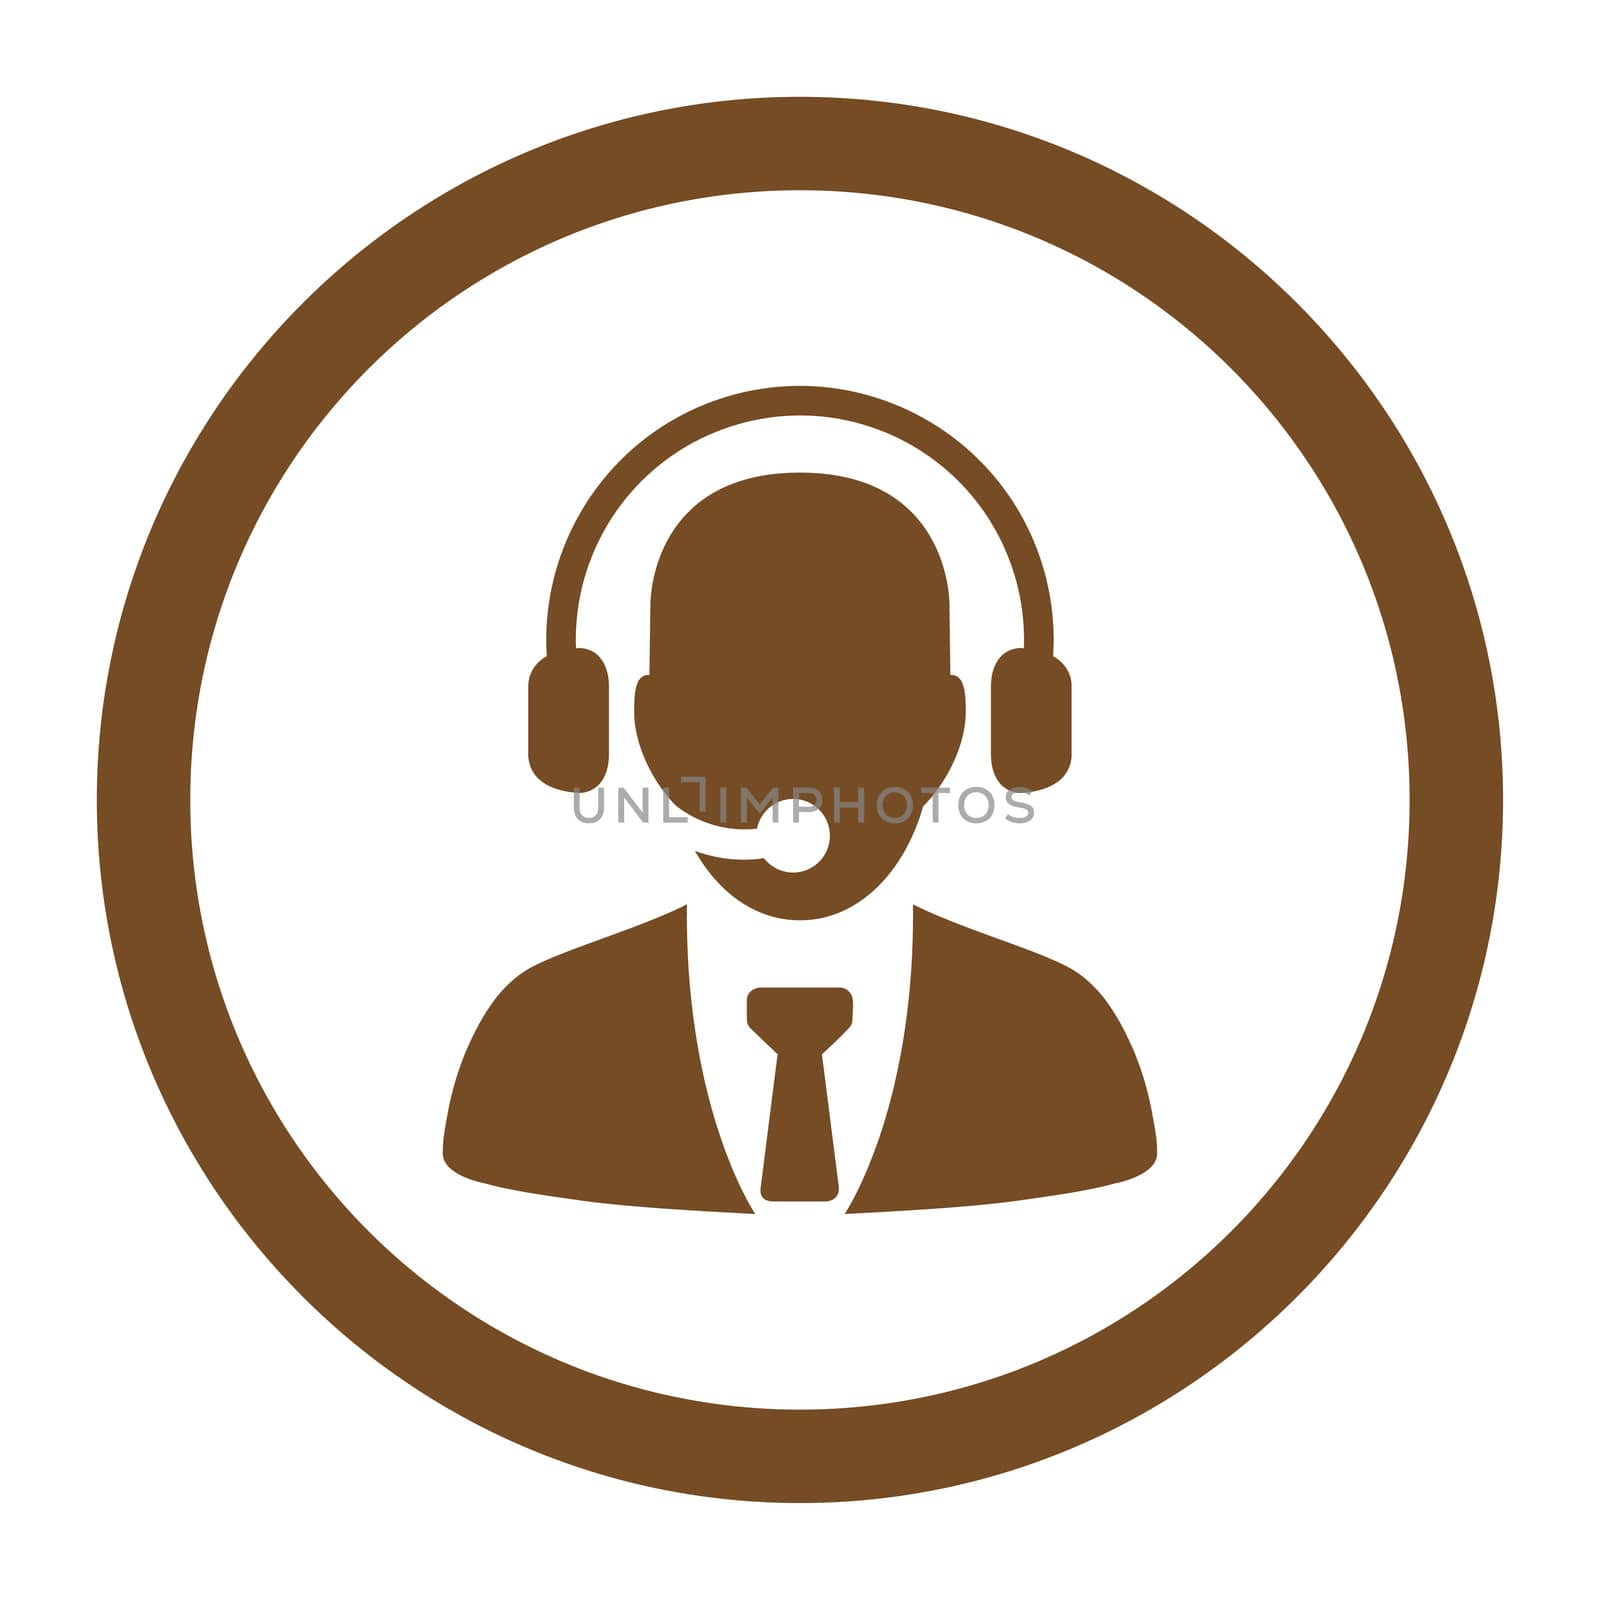 Call center glyph icon. This rounded flat symbol is drawn with brown color on a white background.